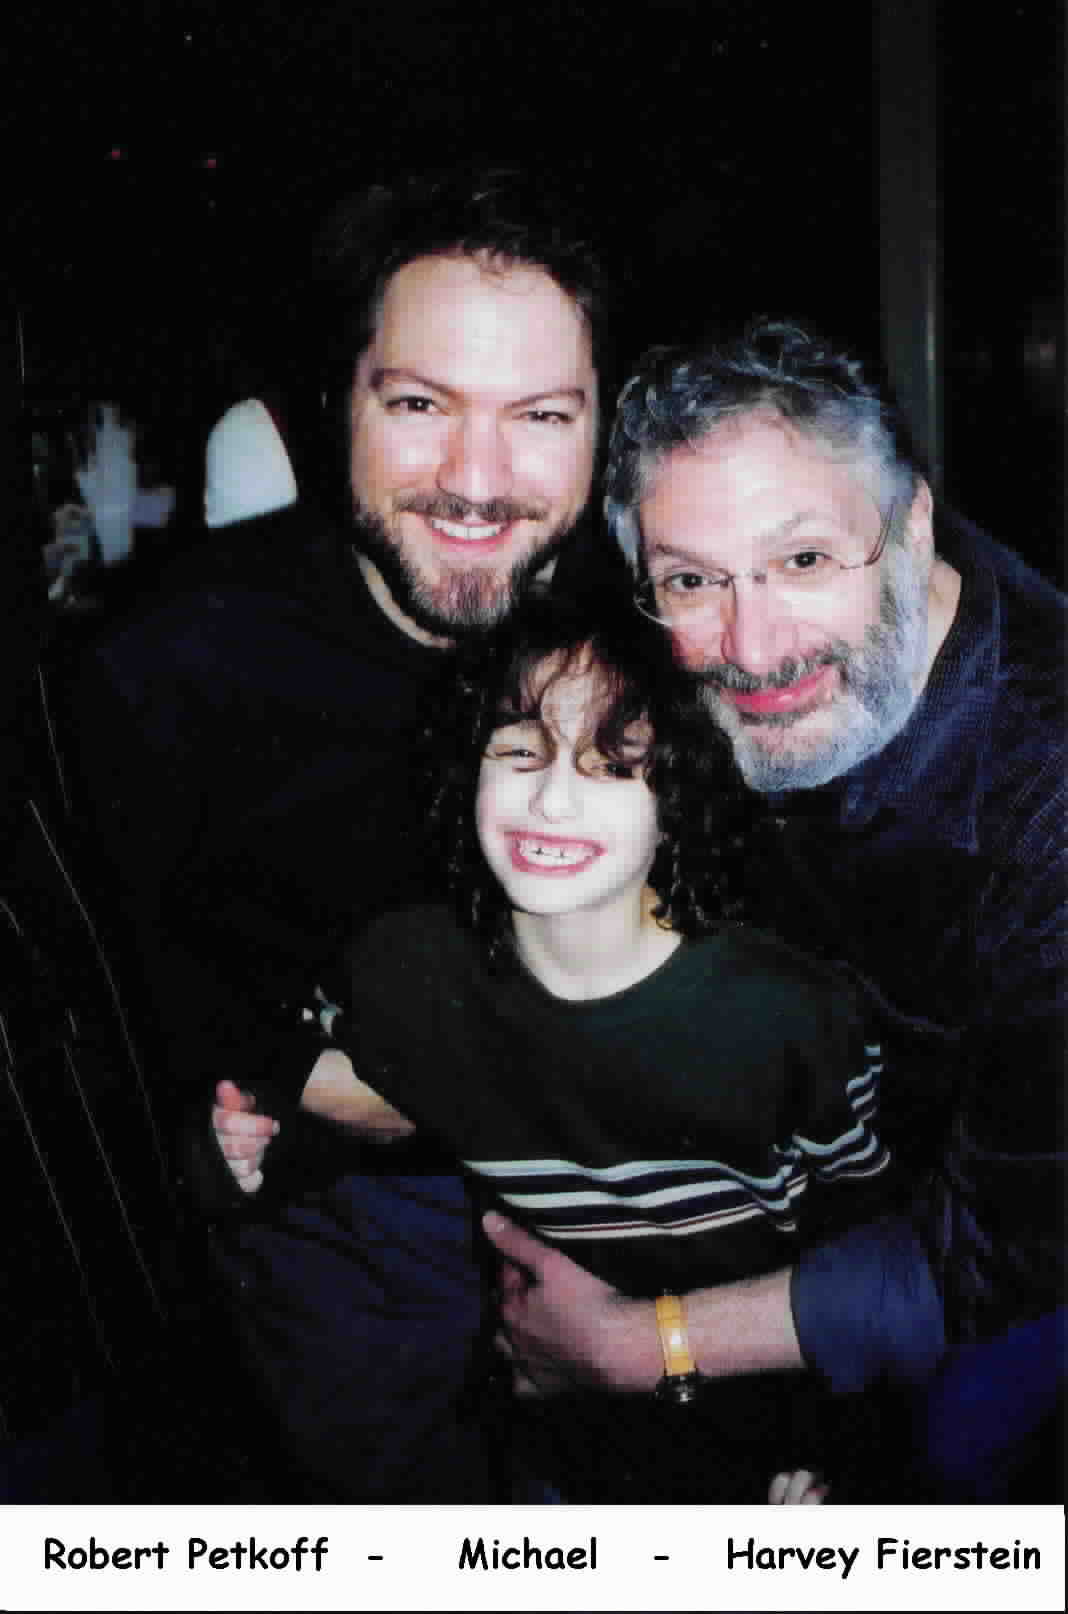 Michael, Harvey Fierstein and Robert Petkoff back stage at Broadway's Fiddler On The Roof